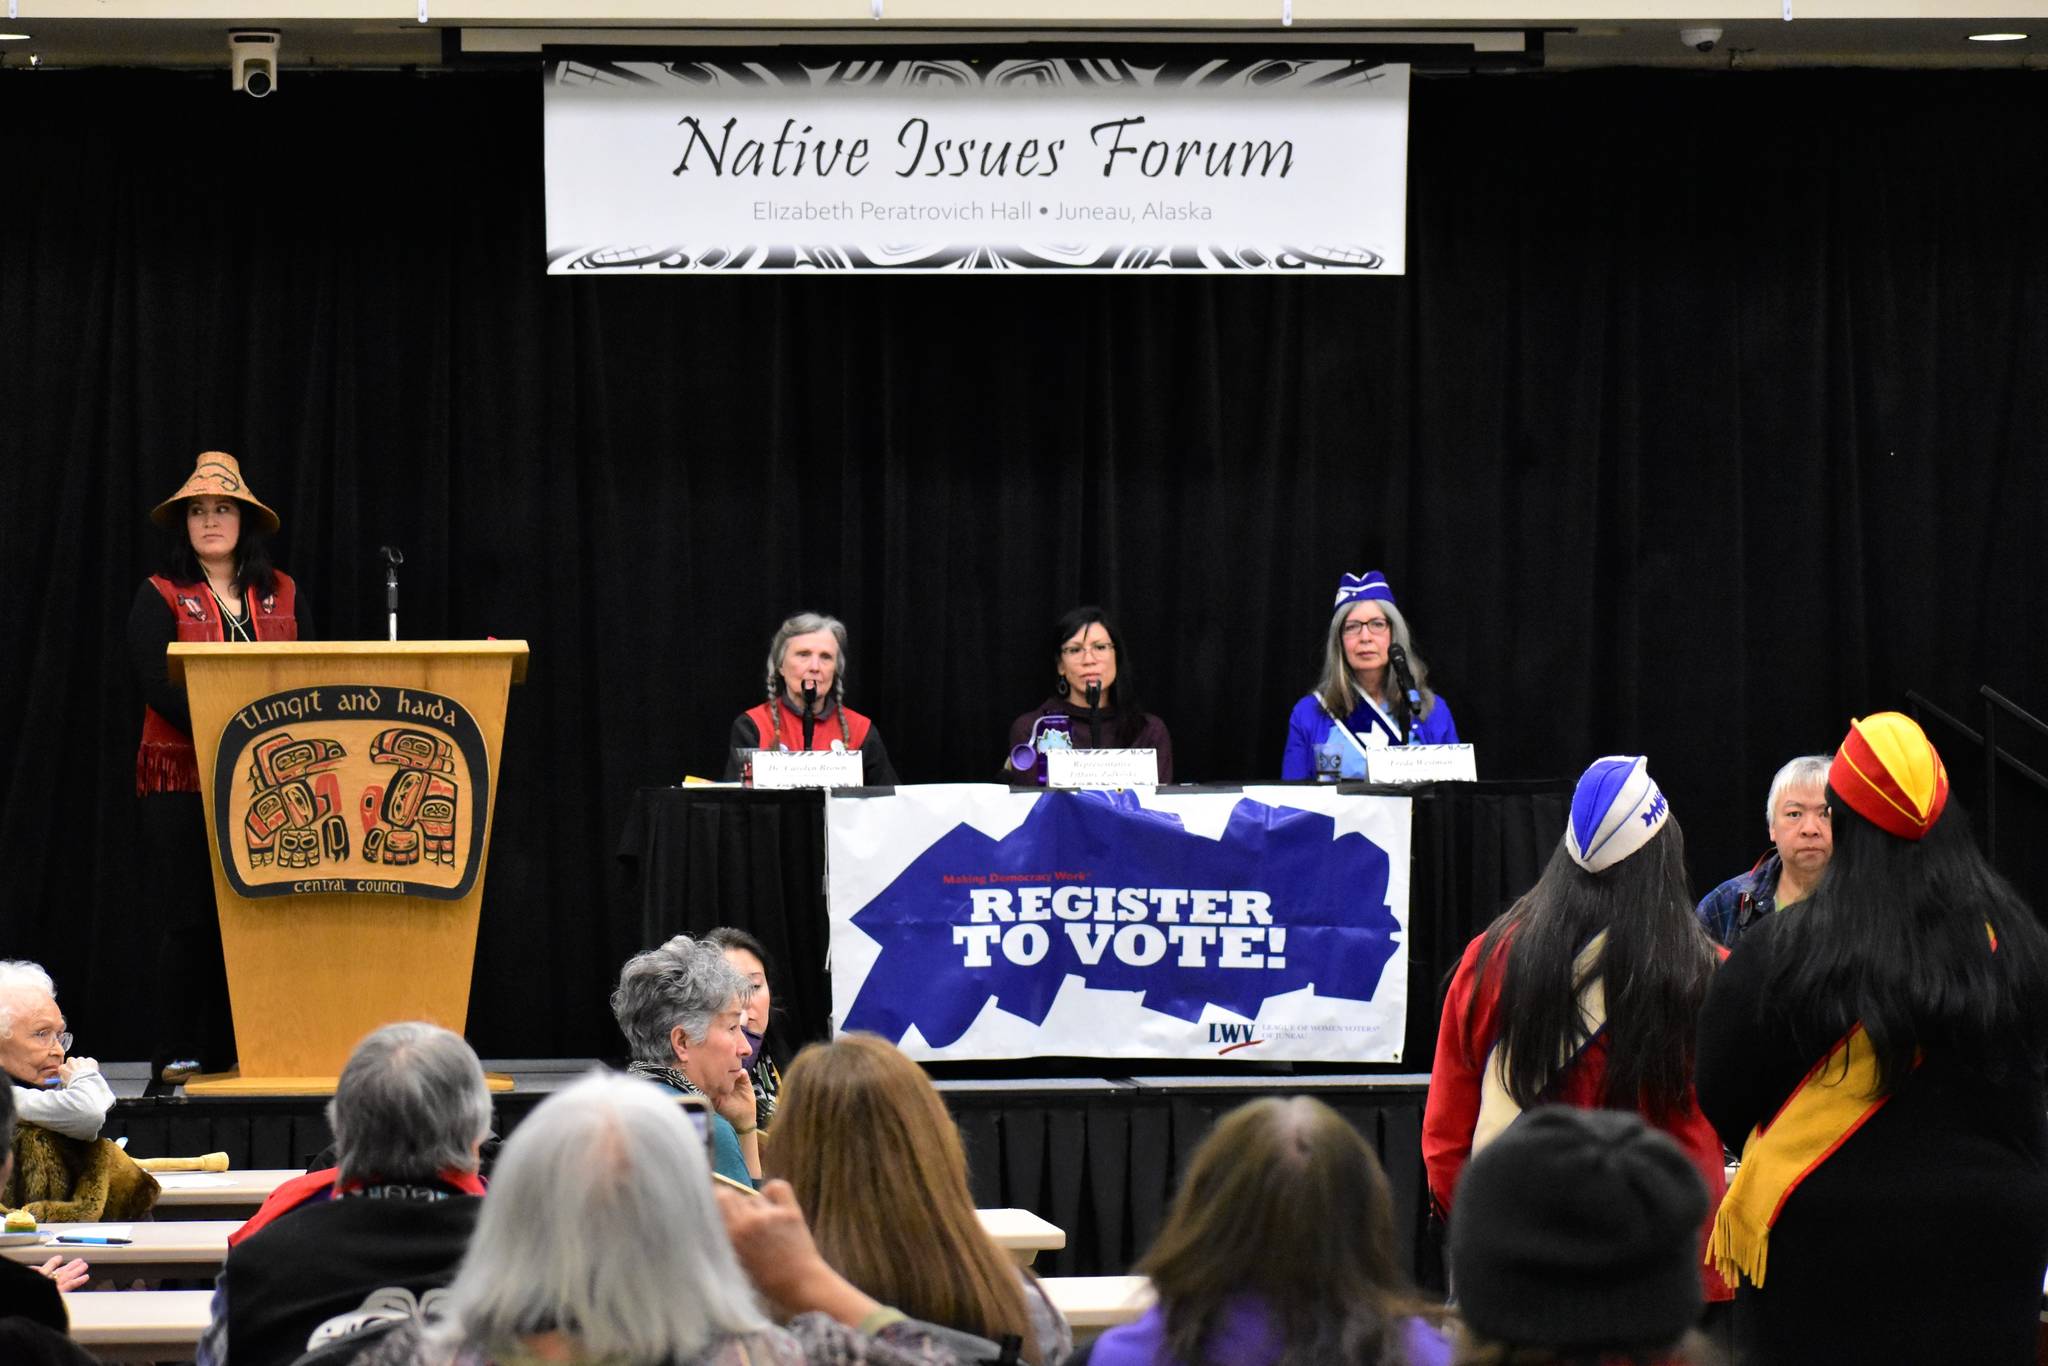 The panel at the Native Issues Forum at Elizabeth Peratrovich Hall on Monday. (Peter Segall | Juneau Empire)